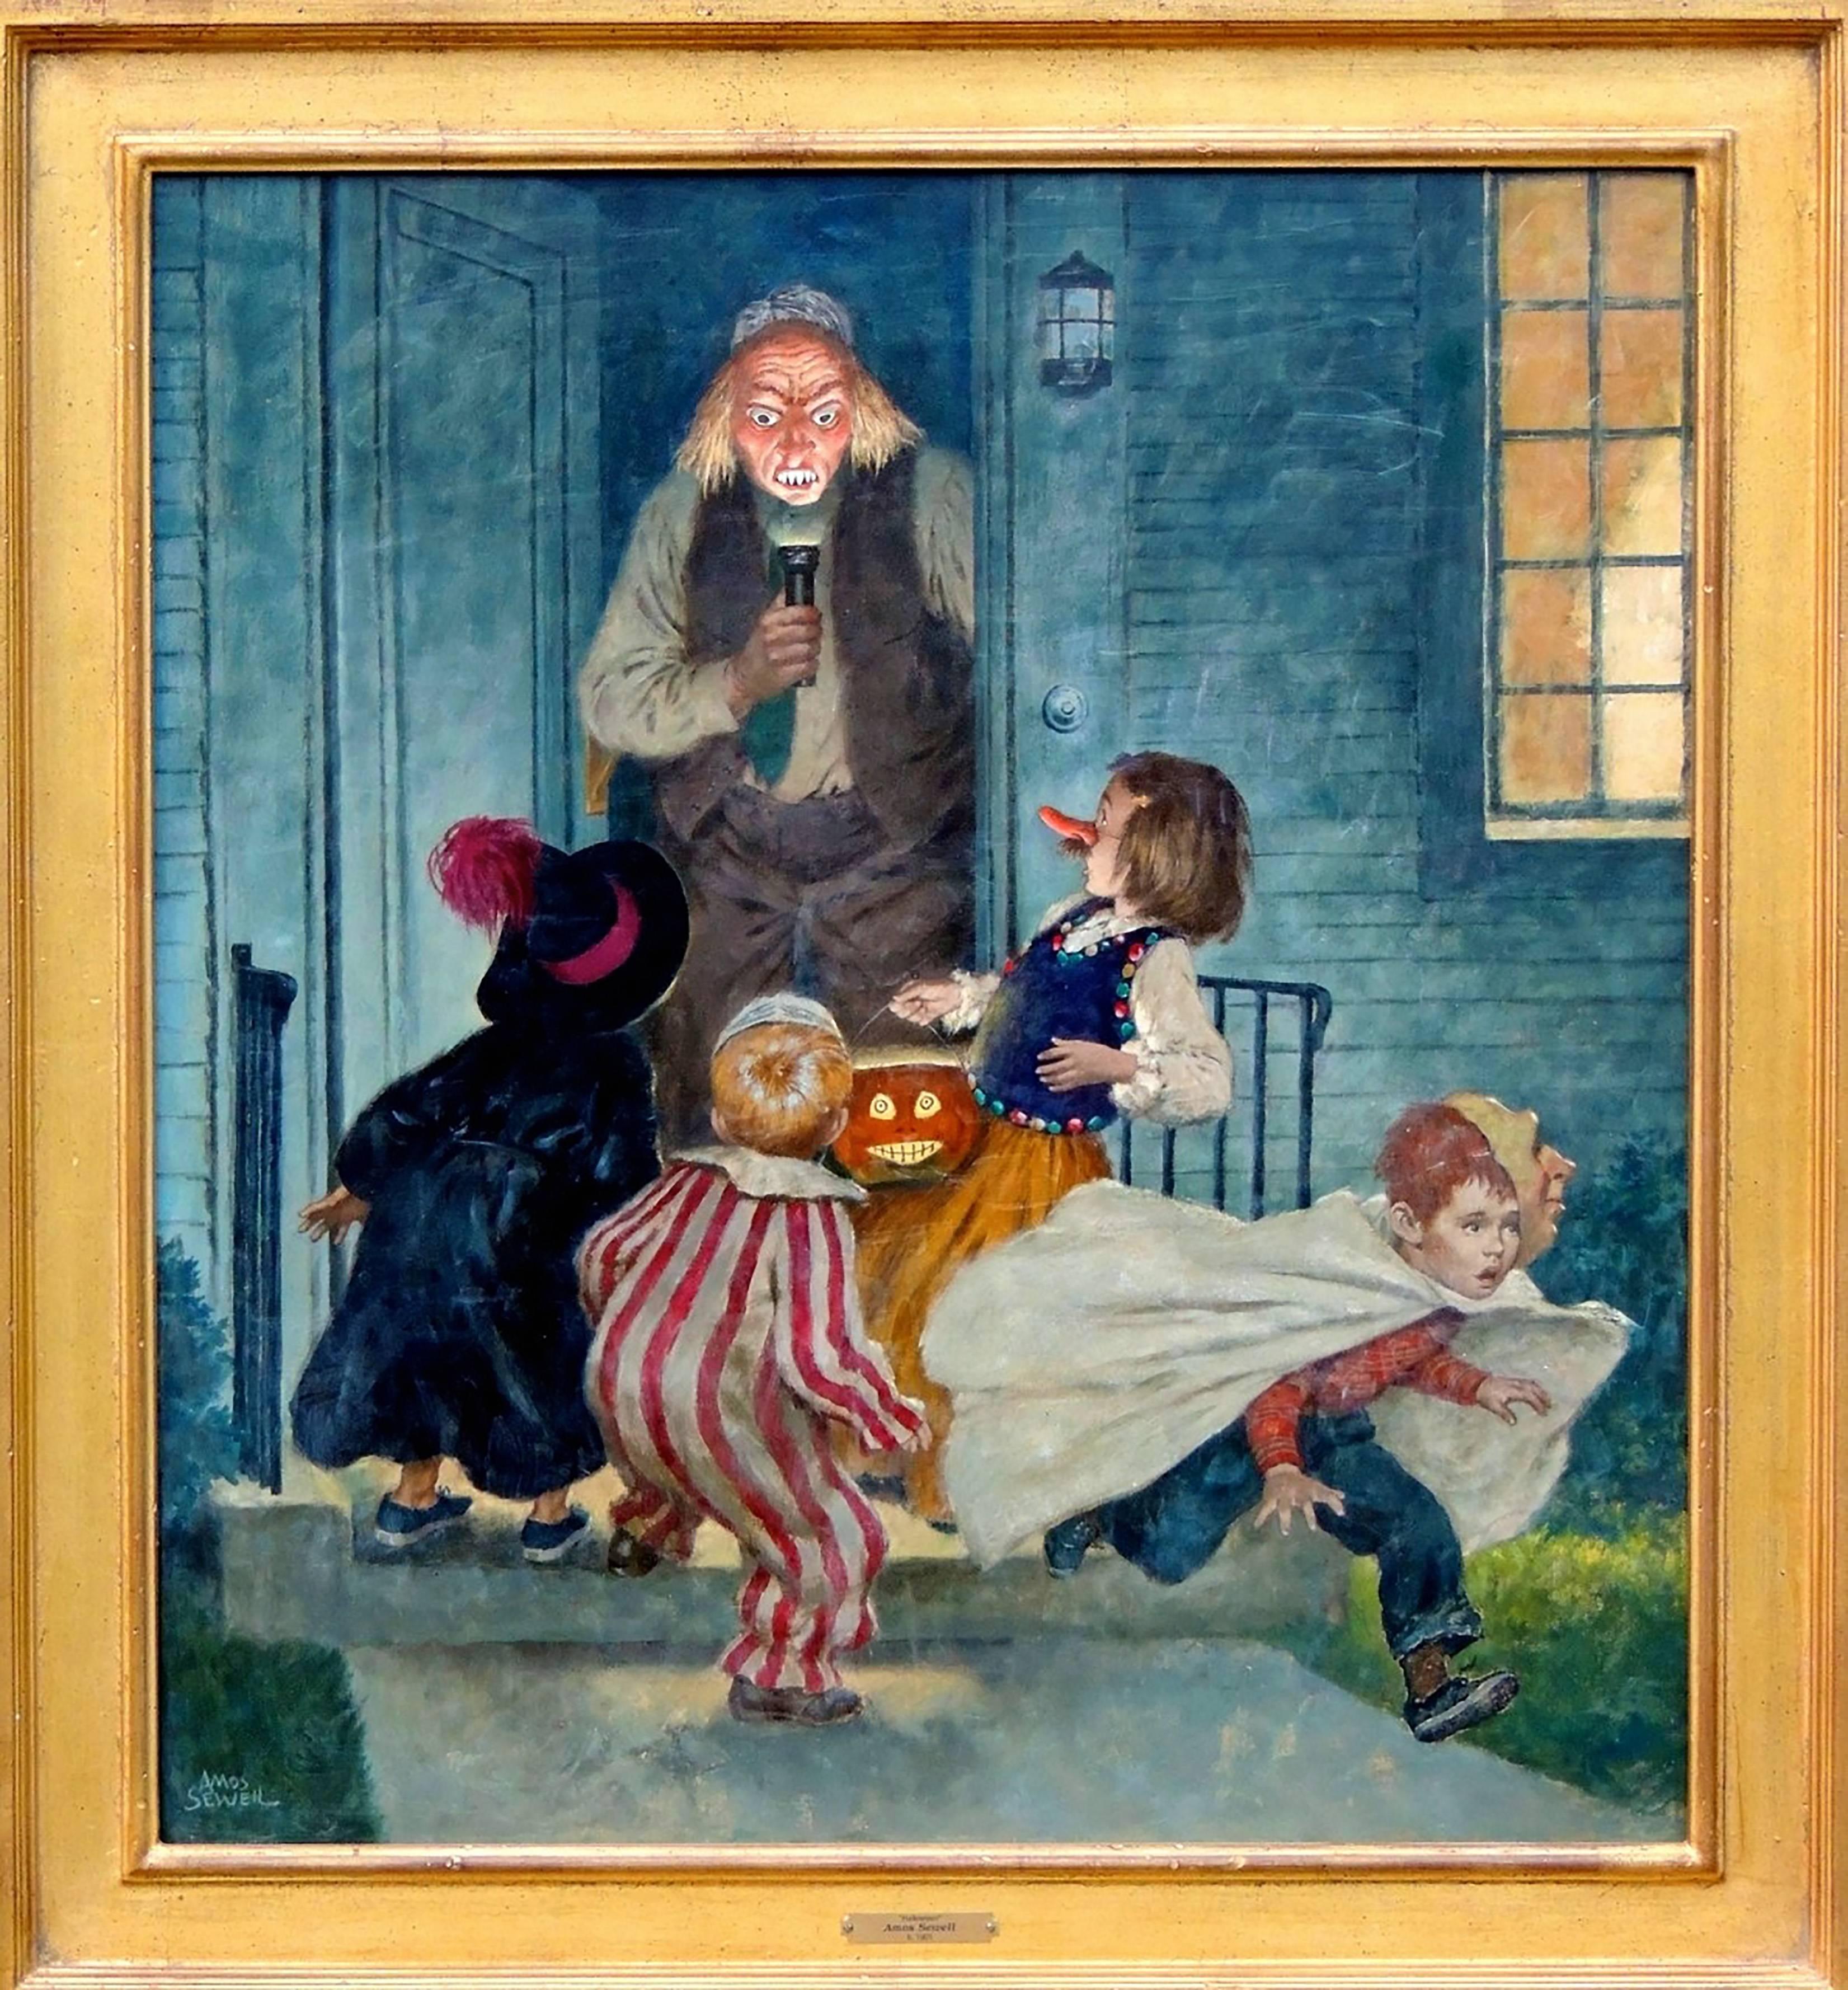 Cover of The Saturday Evening Post, Halloween Edition - Painting by Amos Sewell